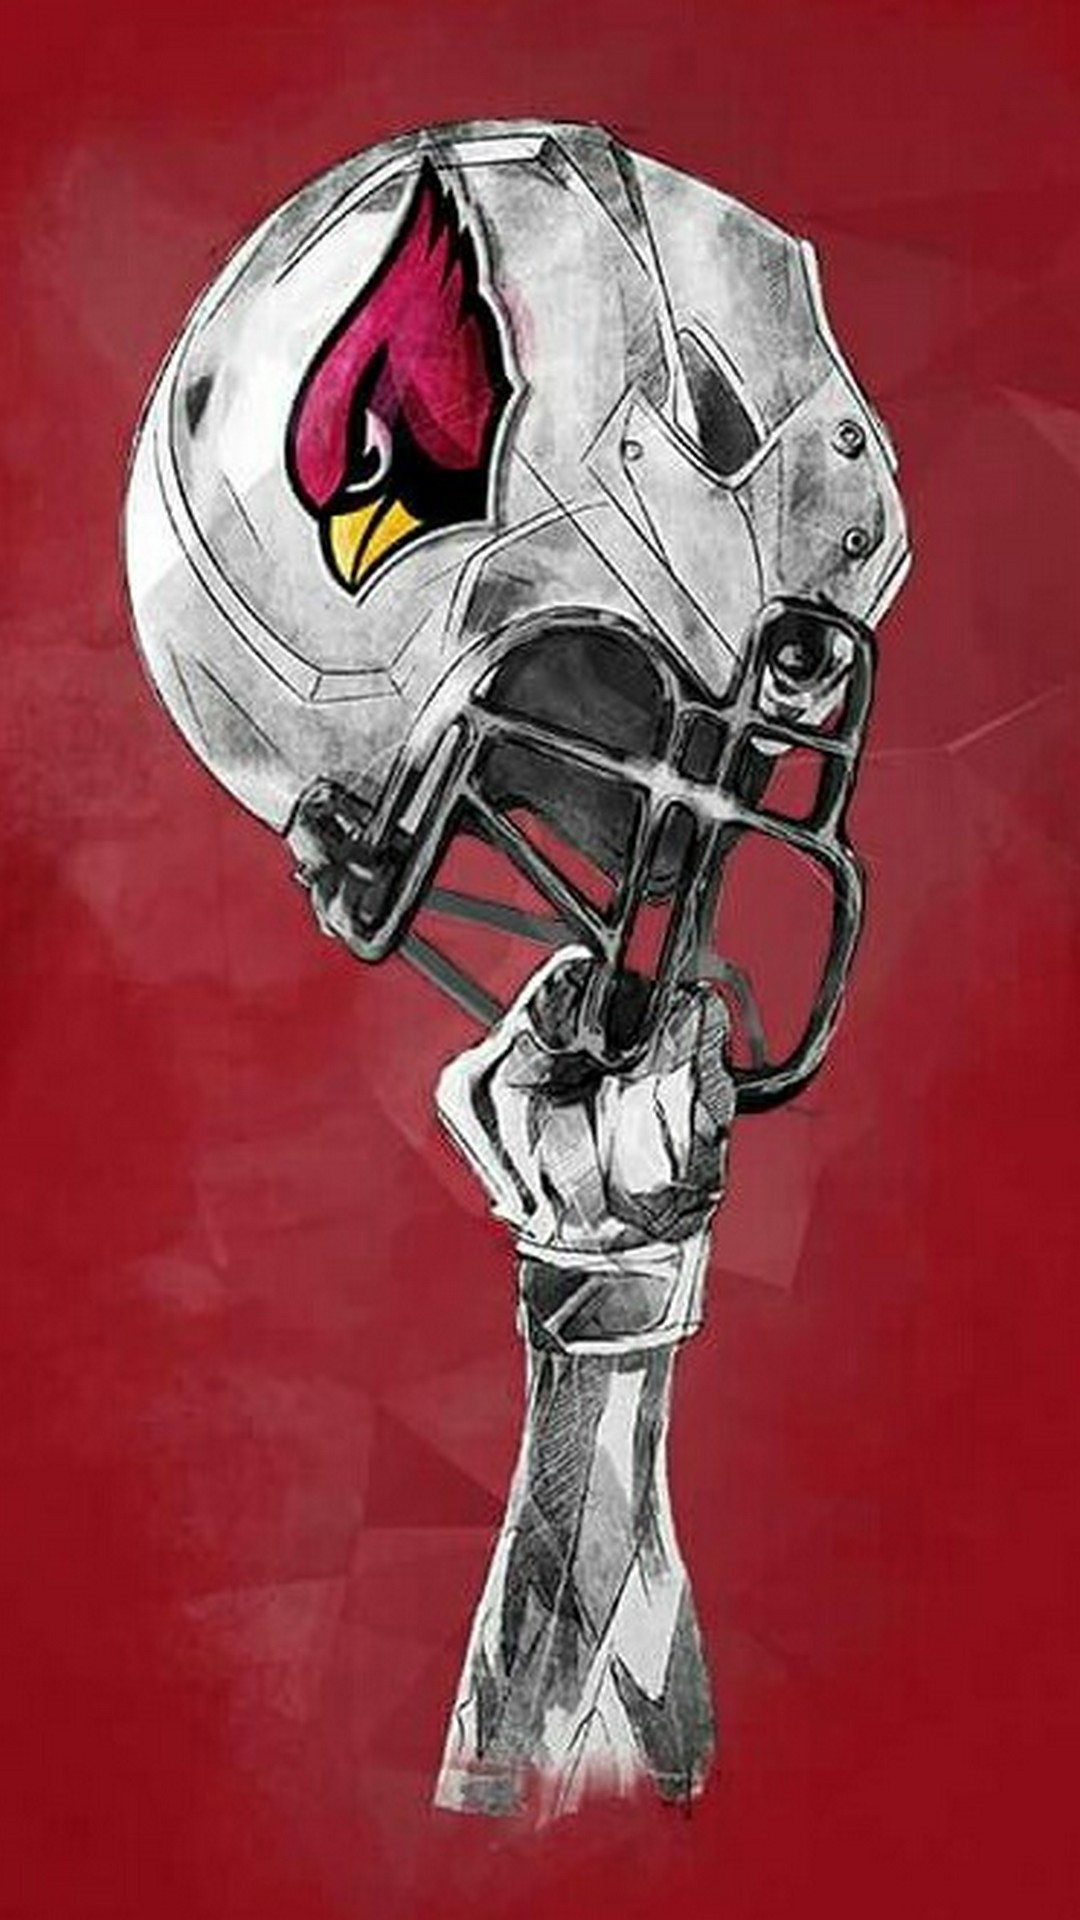 Screensaver iPhone Arizona Cardinals With high-resolution 1080X1920 pixel. Donwload and set as wallpaper for your iPhone X, iPhone XS home screen backgrounds, XS Max, XR, iPhone8 lock screen wallpaper, iPhone 7, 6, SE, and other mobile devices